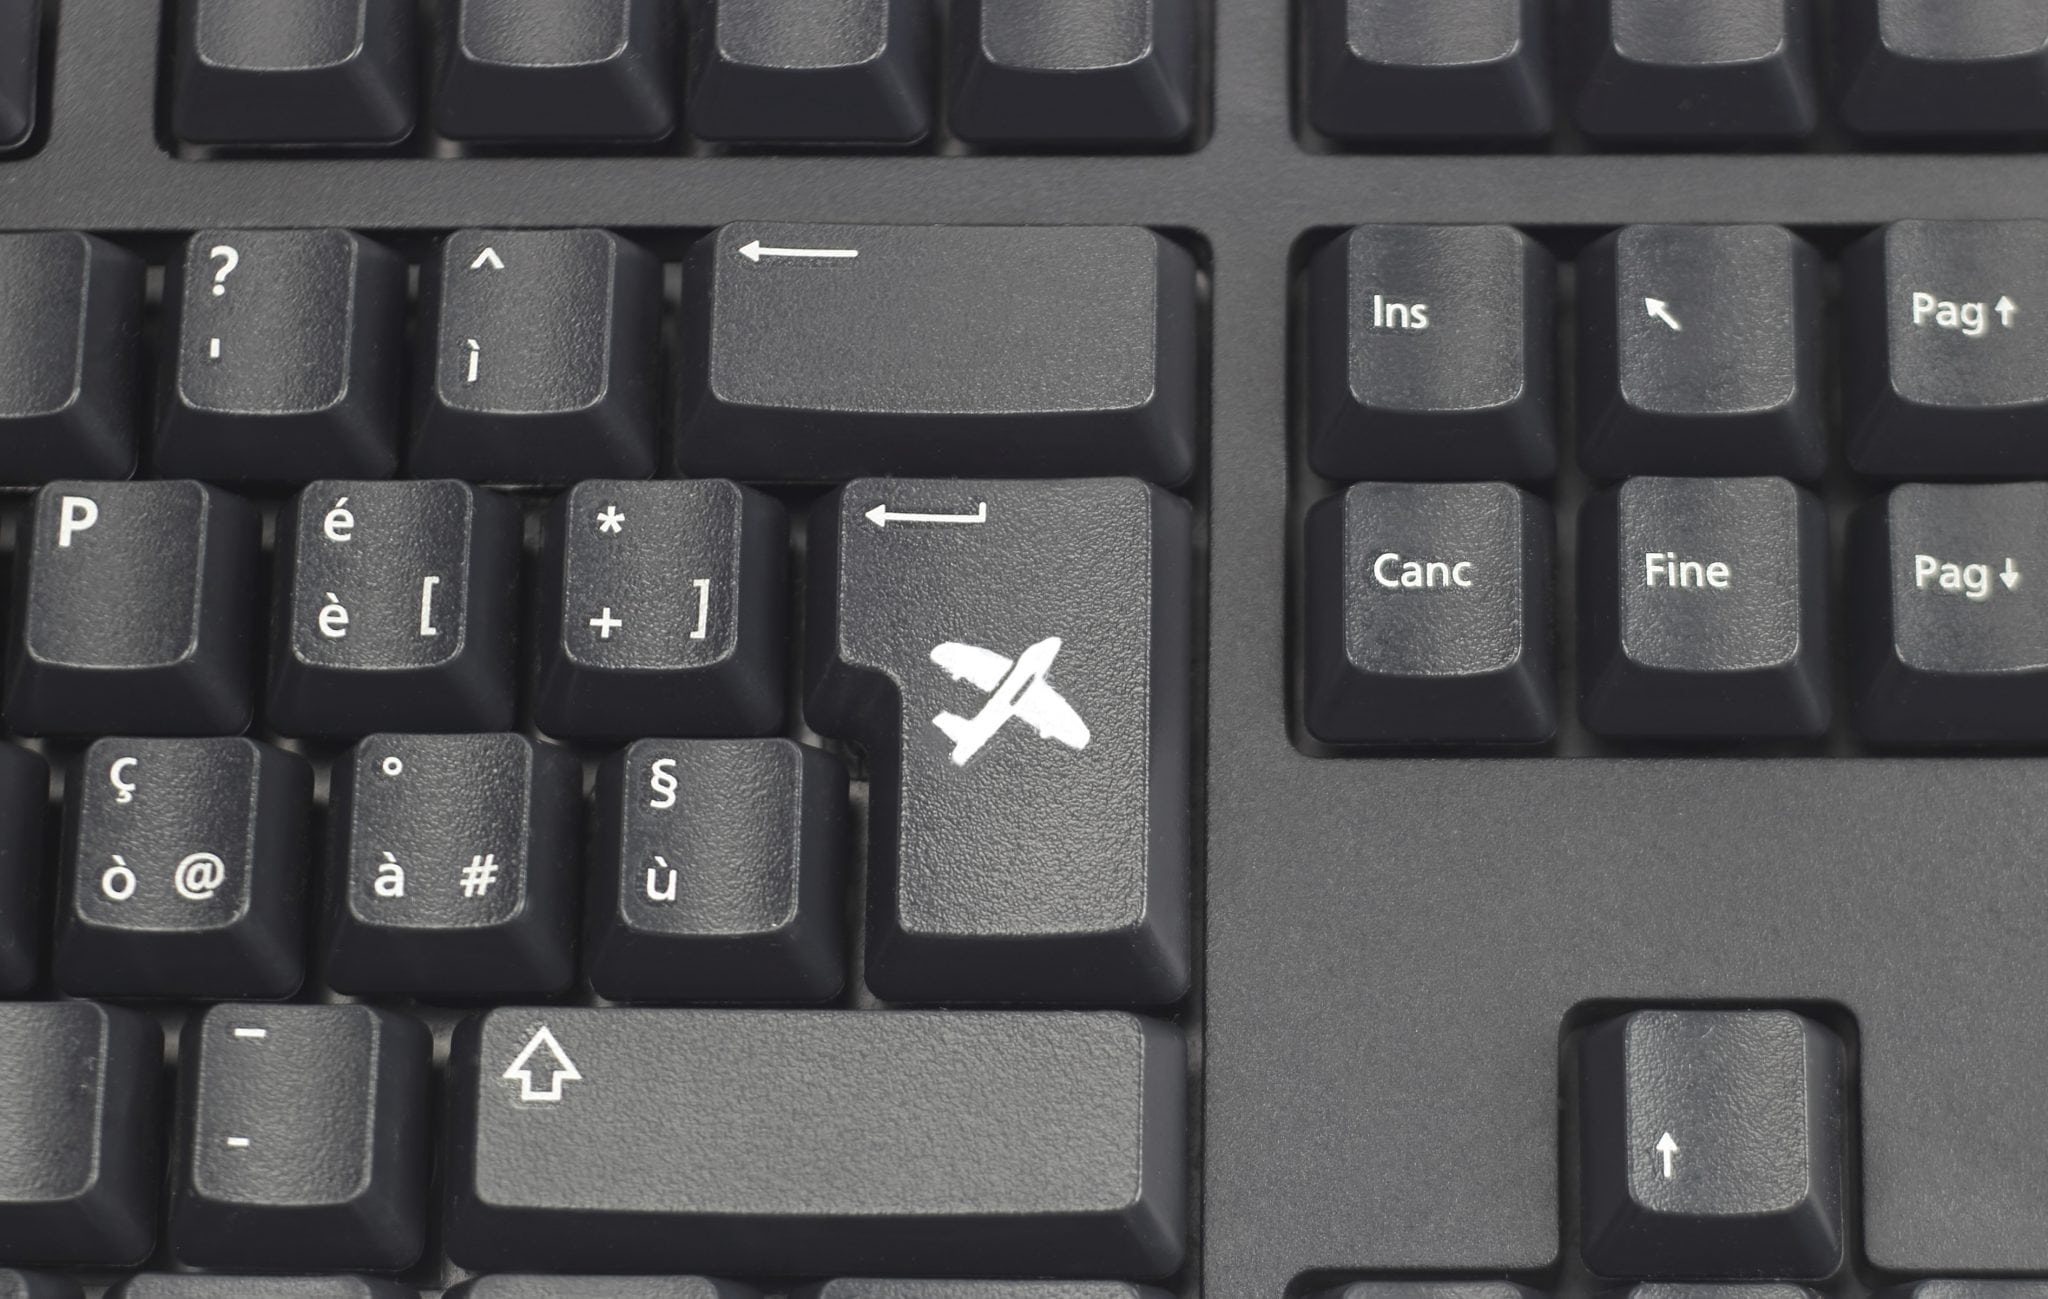 A plane superimposed over a keyboard.